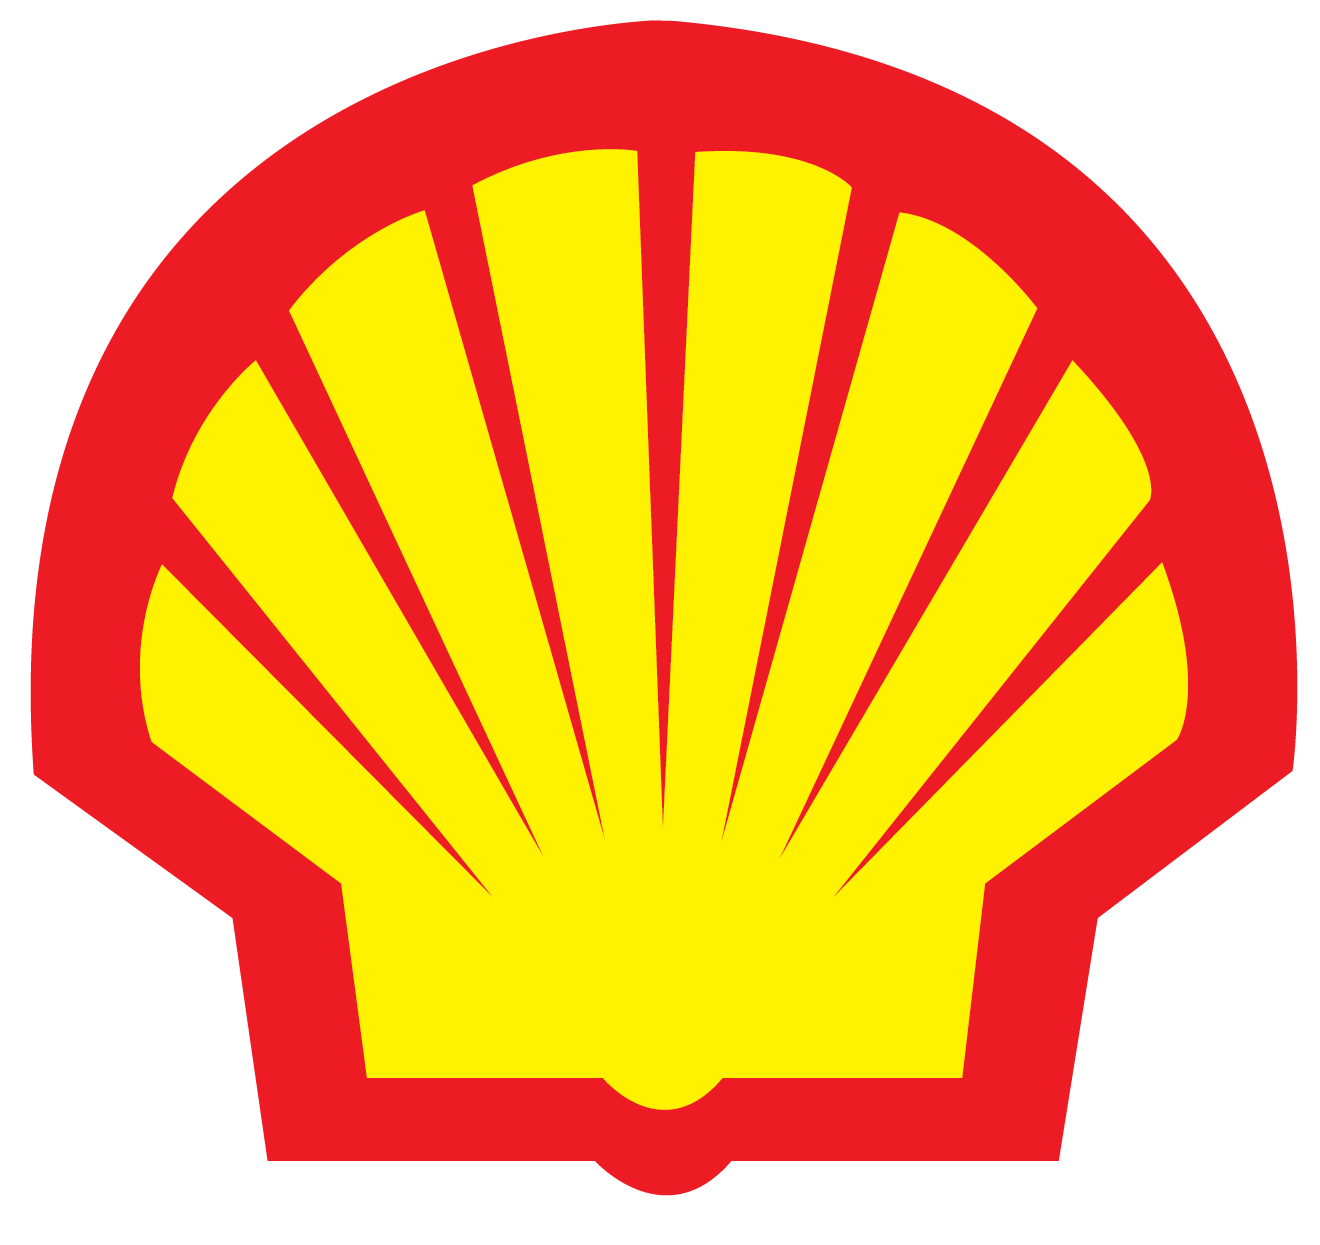 Bob Stivers Shell Stations in San Diego